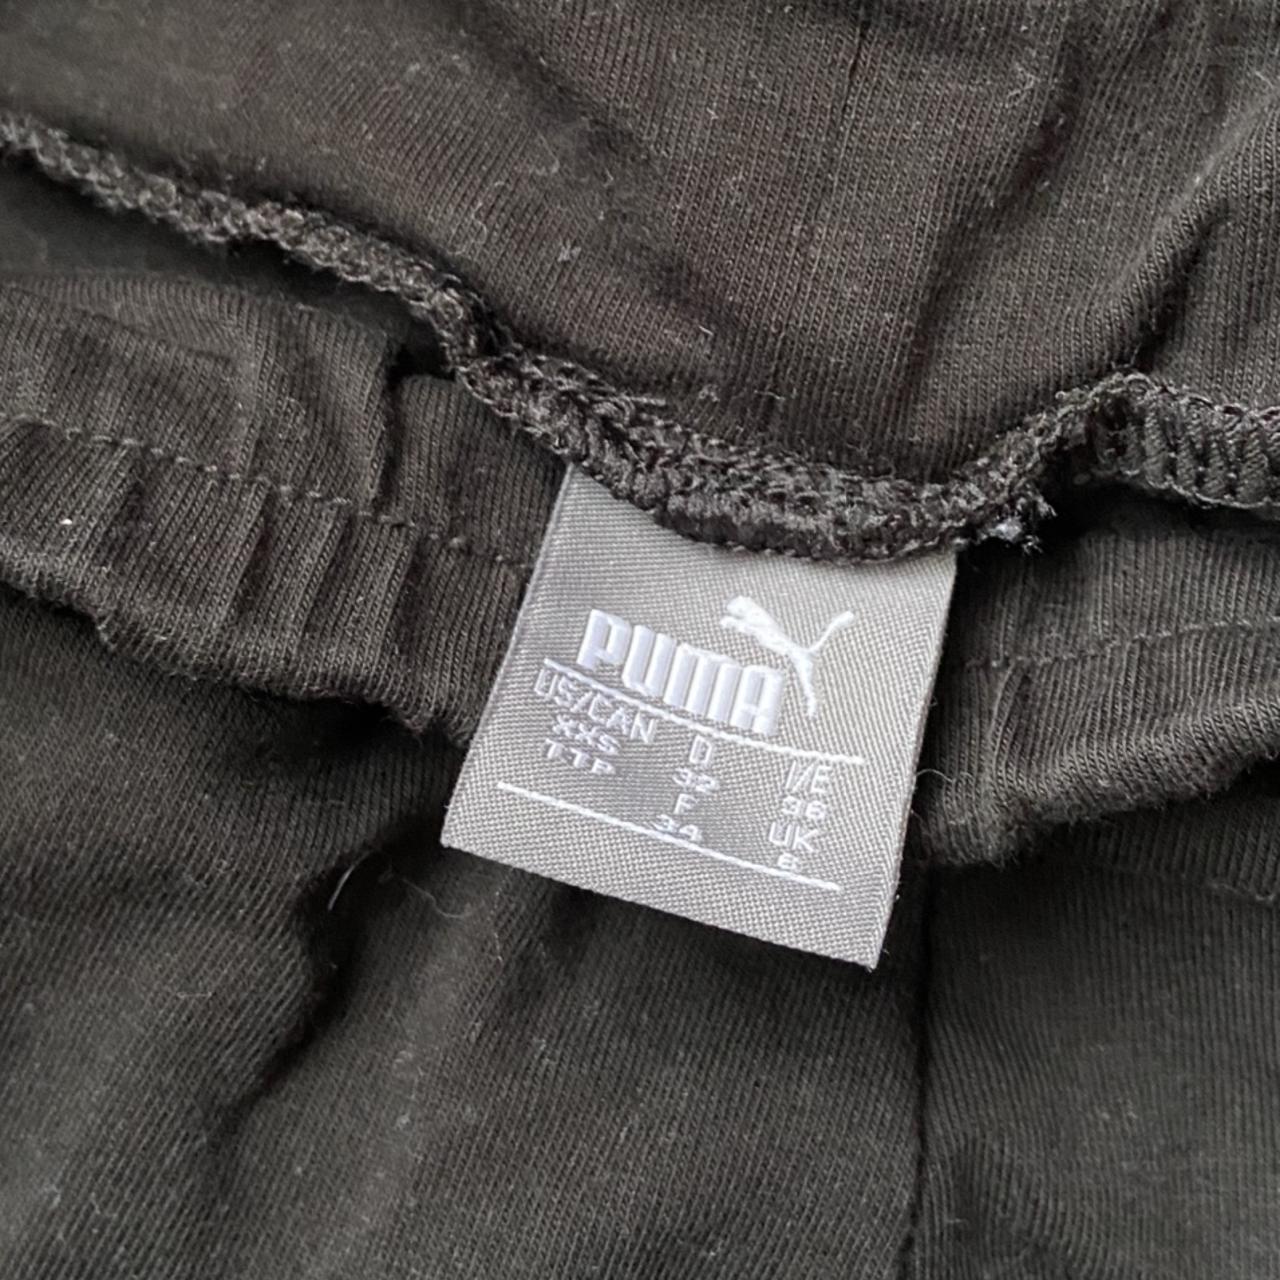 Puma leggings with logo on leg, barely worn and in - Depop